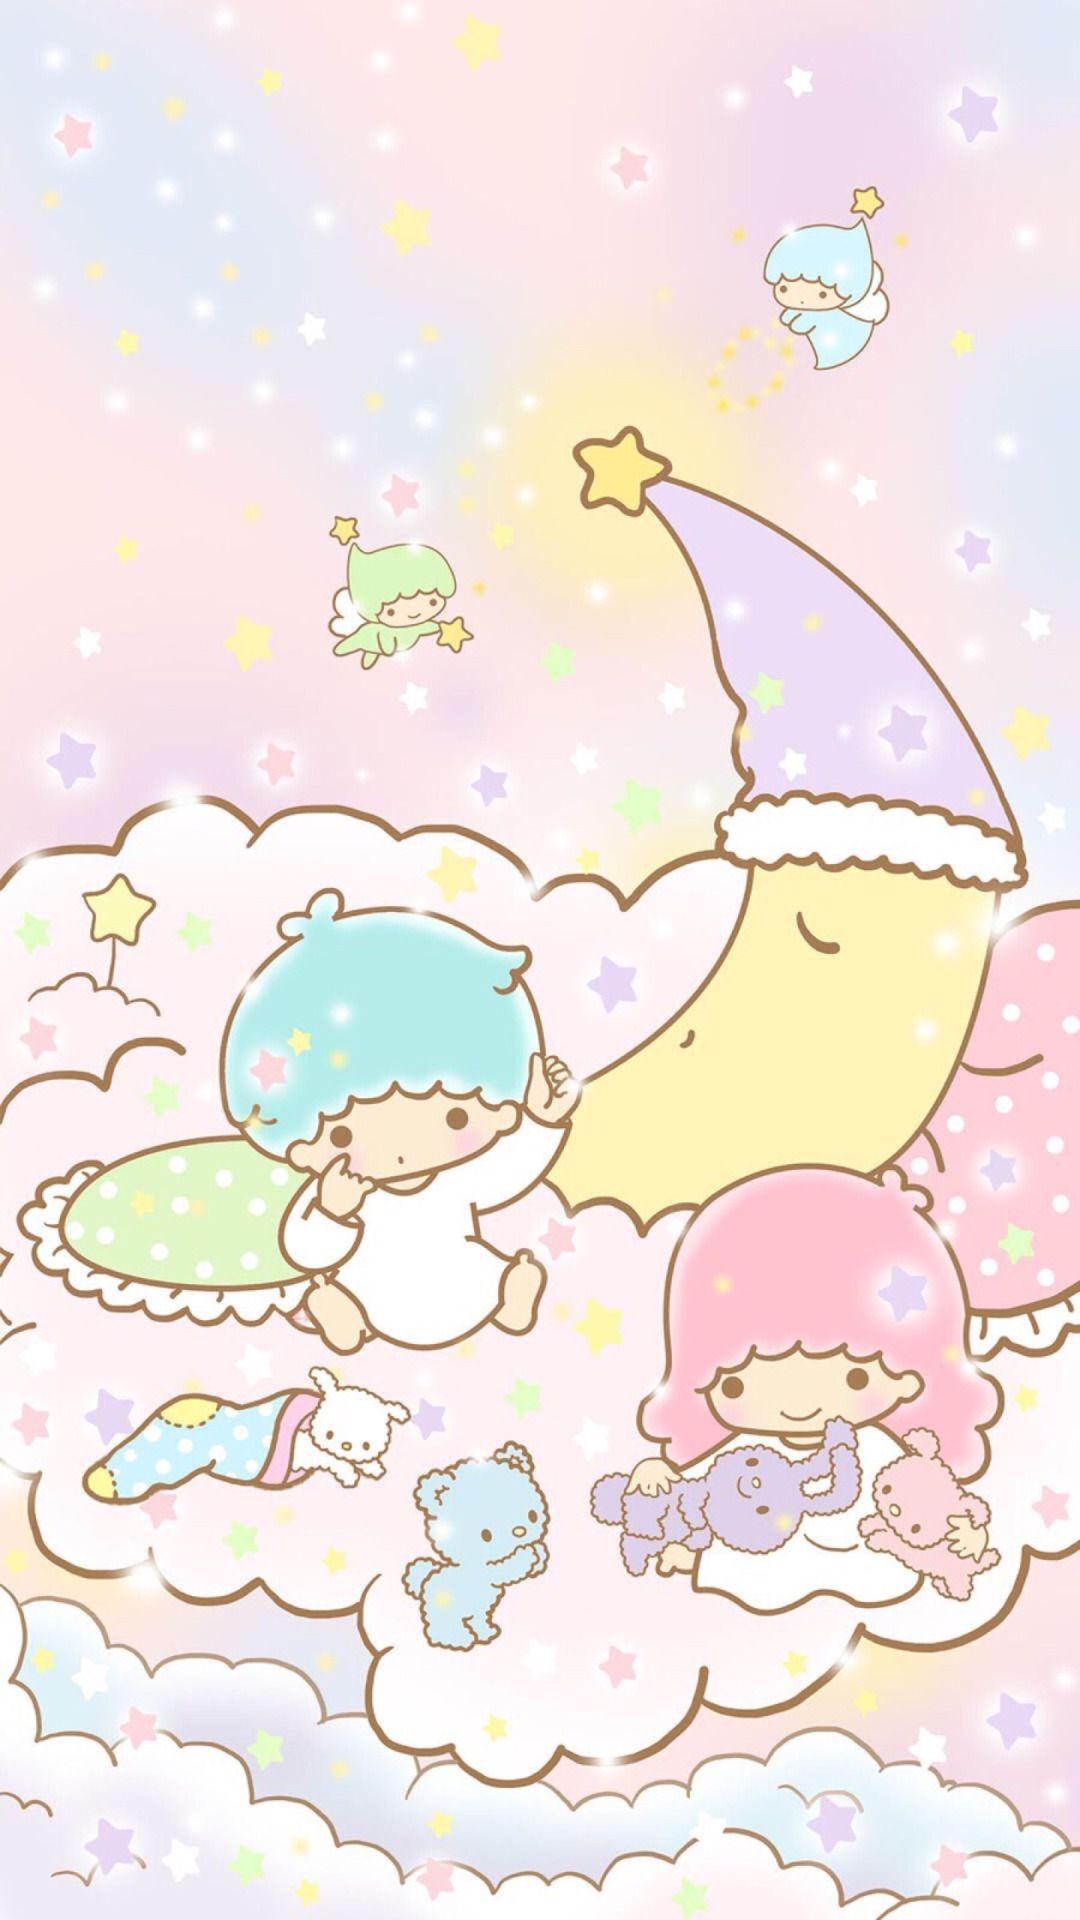 Sanrio Characters Wallpapers - Top Free Sanrio Characters Backgrounds ...